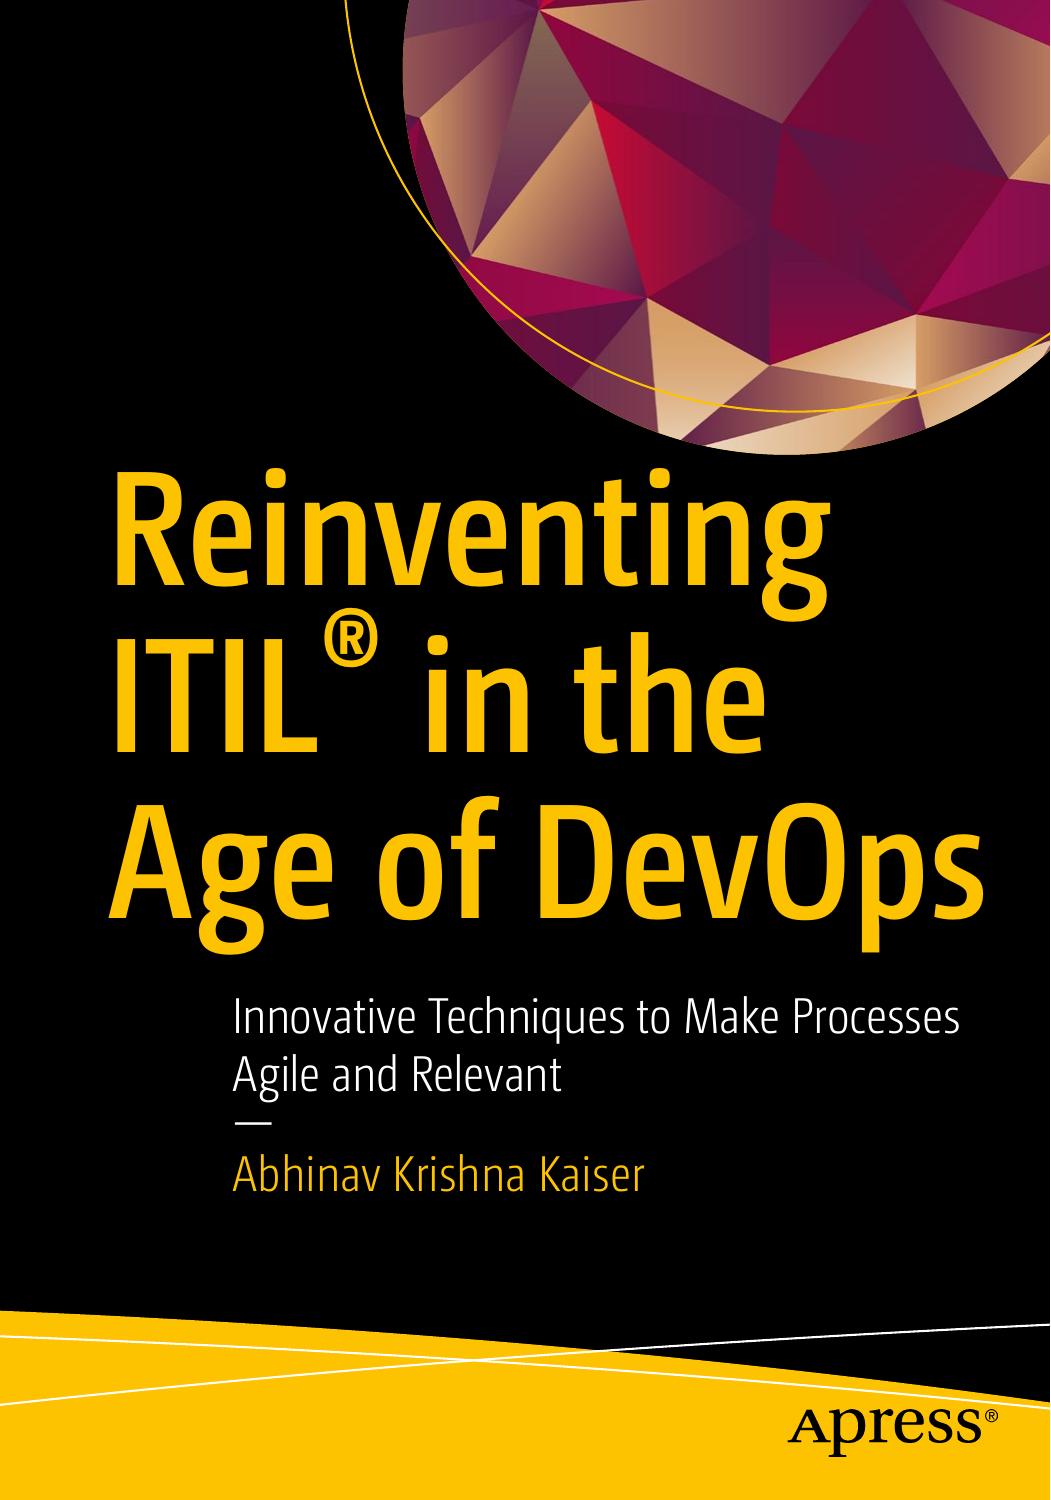 Reinventing ITIL® in the Age of DevOps: Innovative Techniques to Make Processes Agile and Relevant